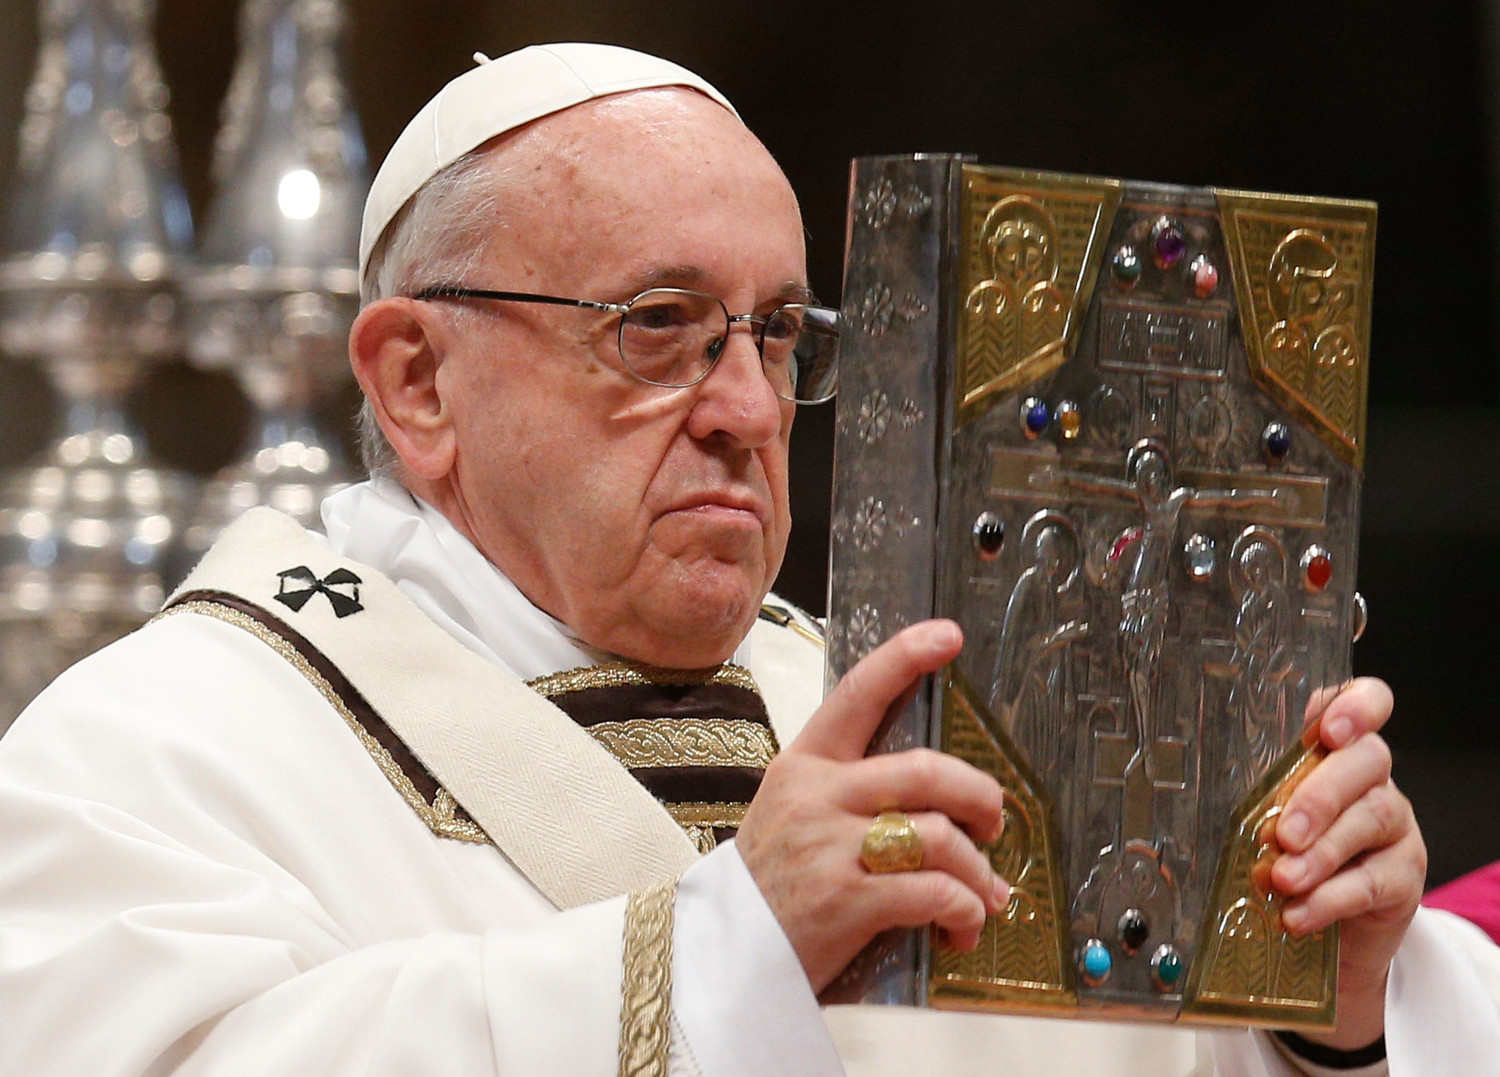 Pope Francis holds the Book of the Gospels as he celebrates Holy Thursday chrism Mass in St. Peter's Basilica at the Vatican March 29.